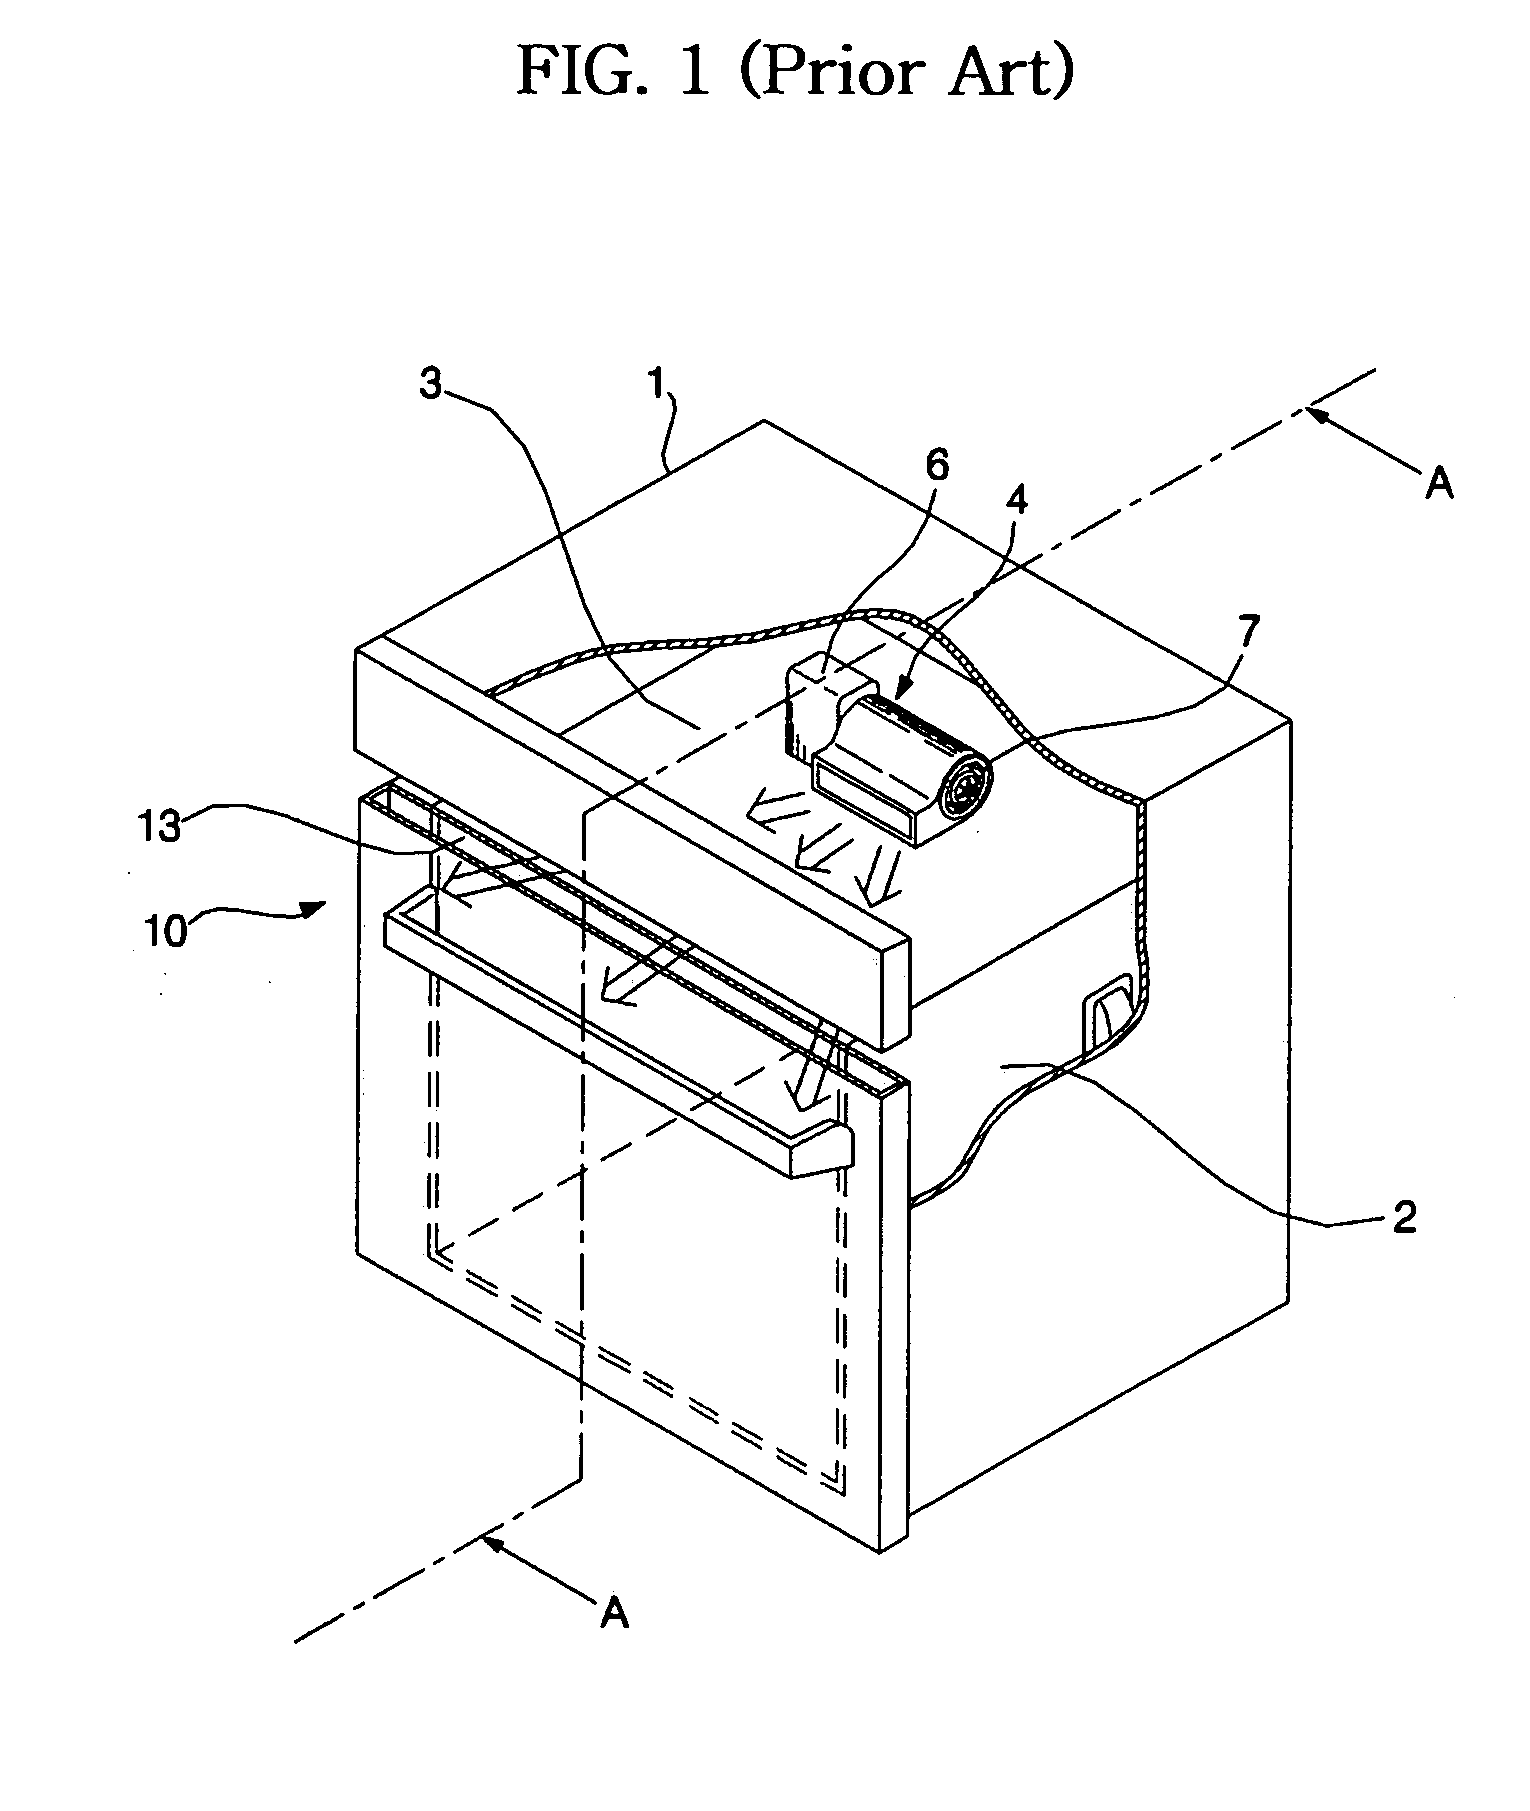 Cooling apparatus of cooking appliance